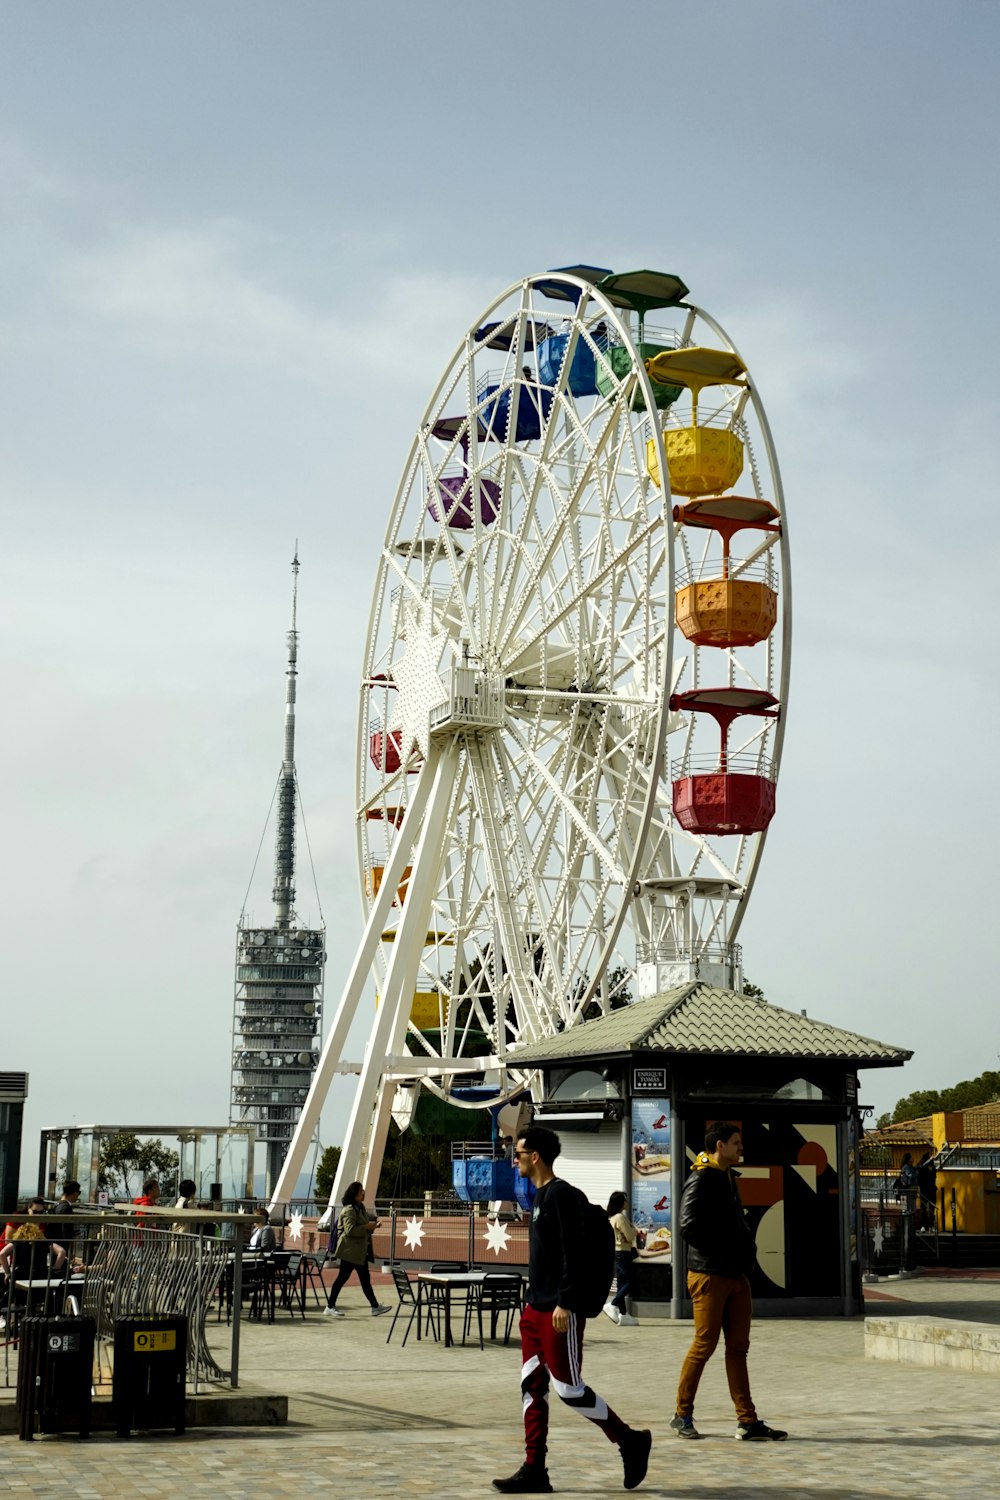 a ferris wheel with people walking around it